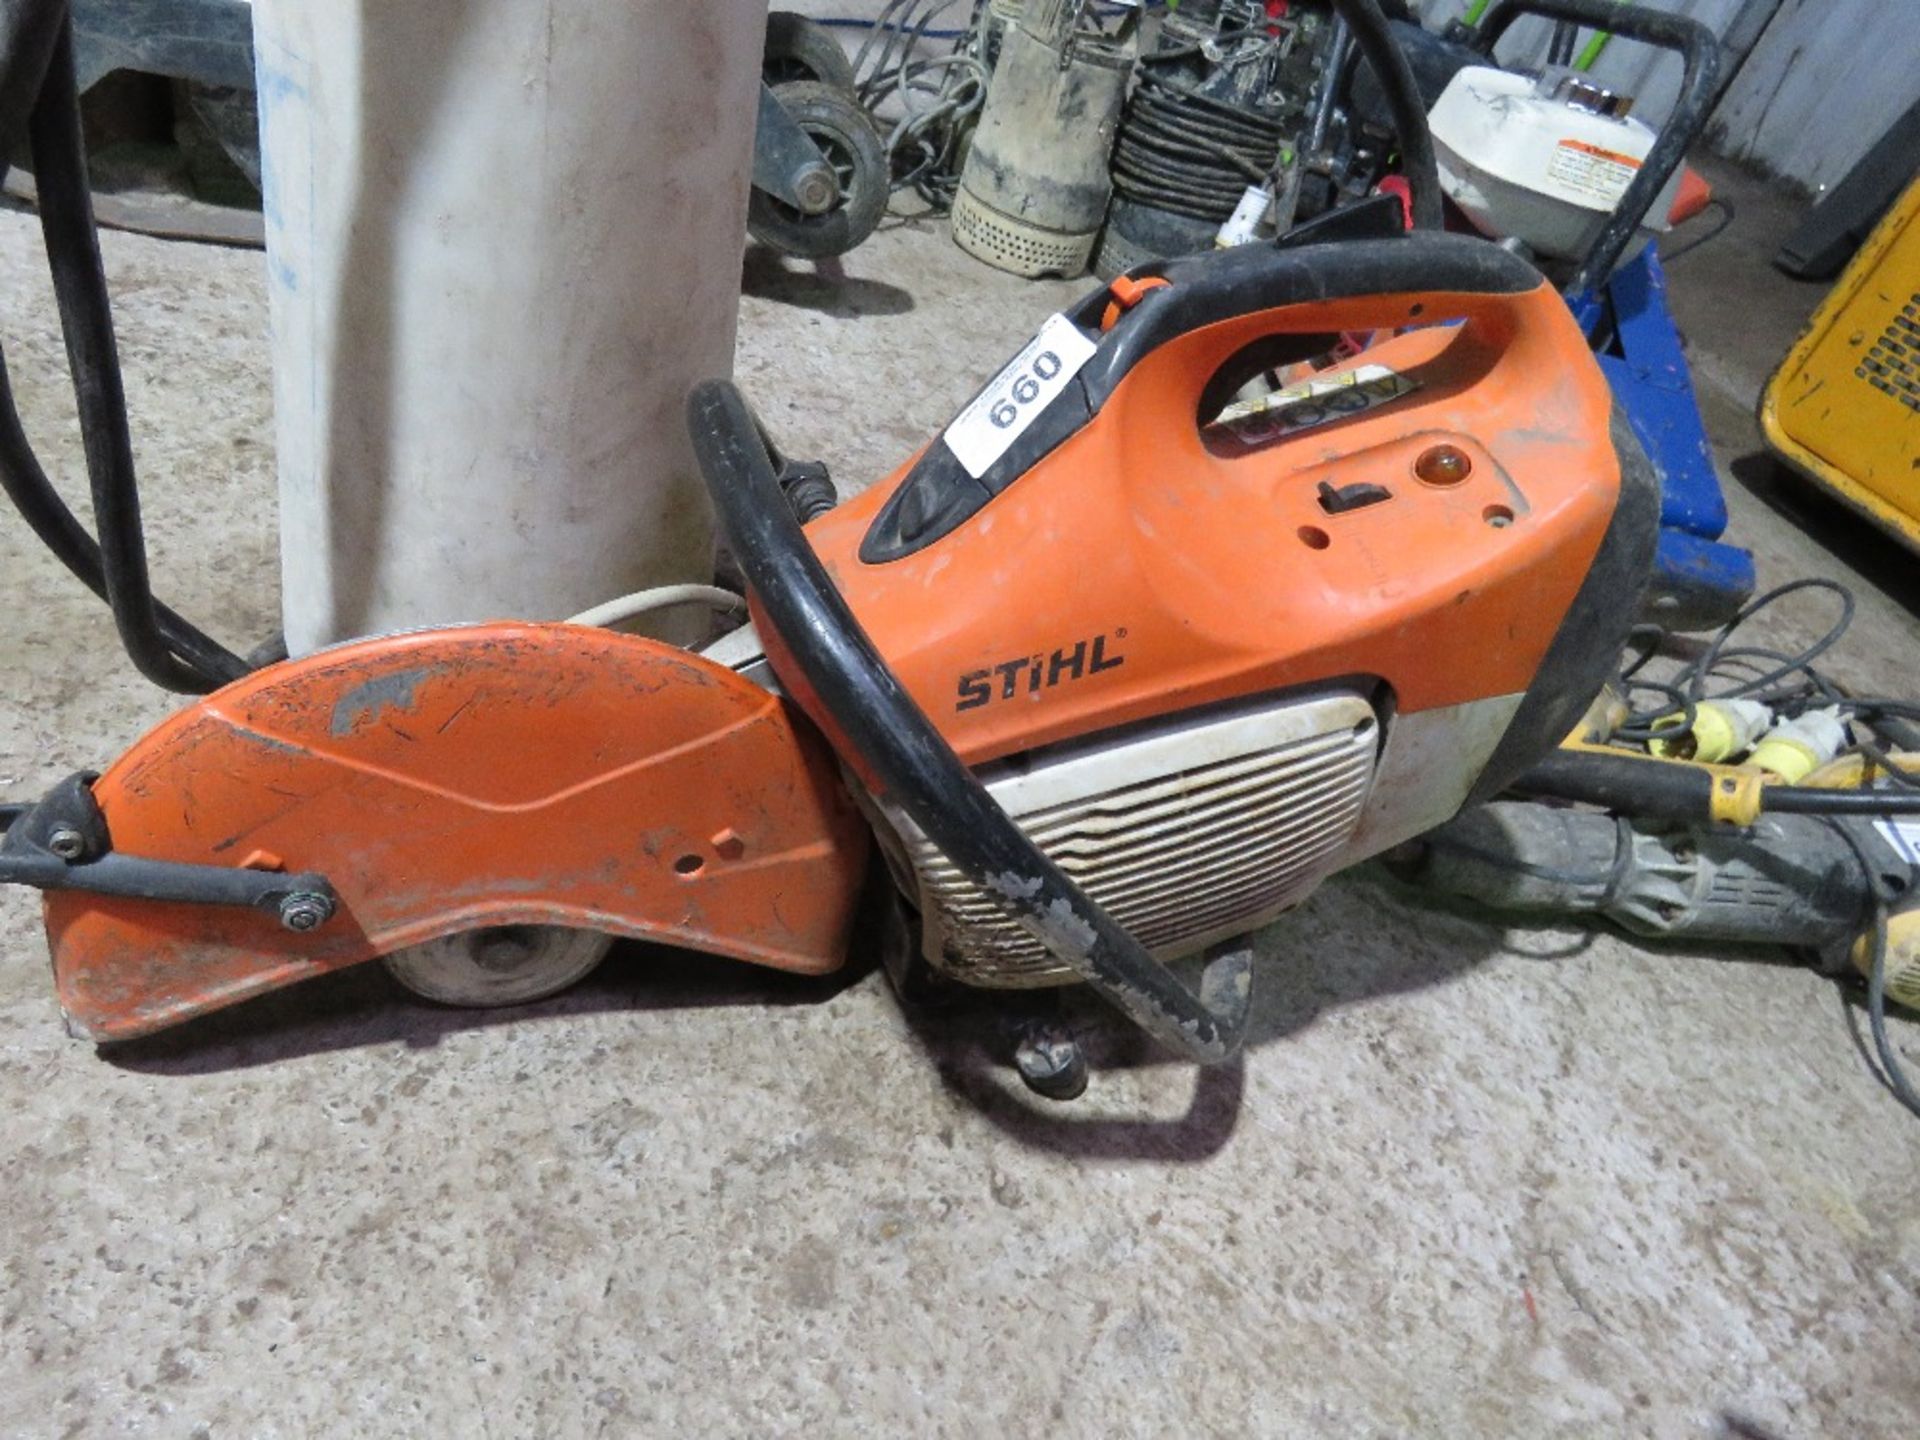 STIHL TS410 TYPE PETROL CUT OFF SAW PLUS A WET CUT BOTTLE. THIS LOT IS SOLD UNDER THE AUCTIONEERS